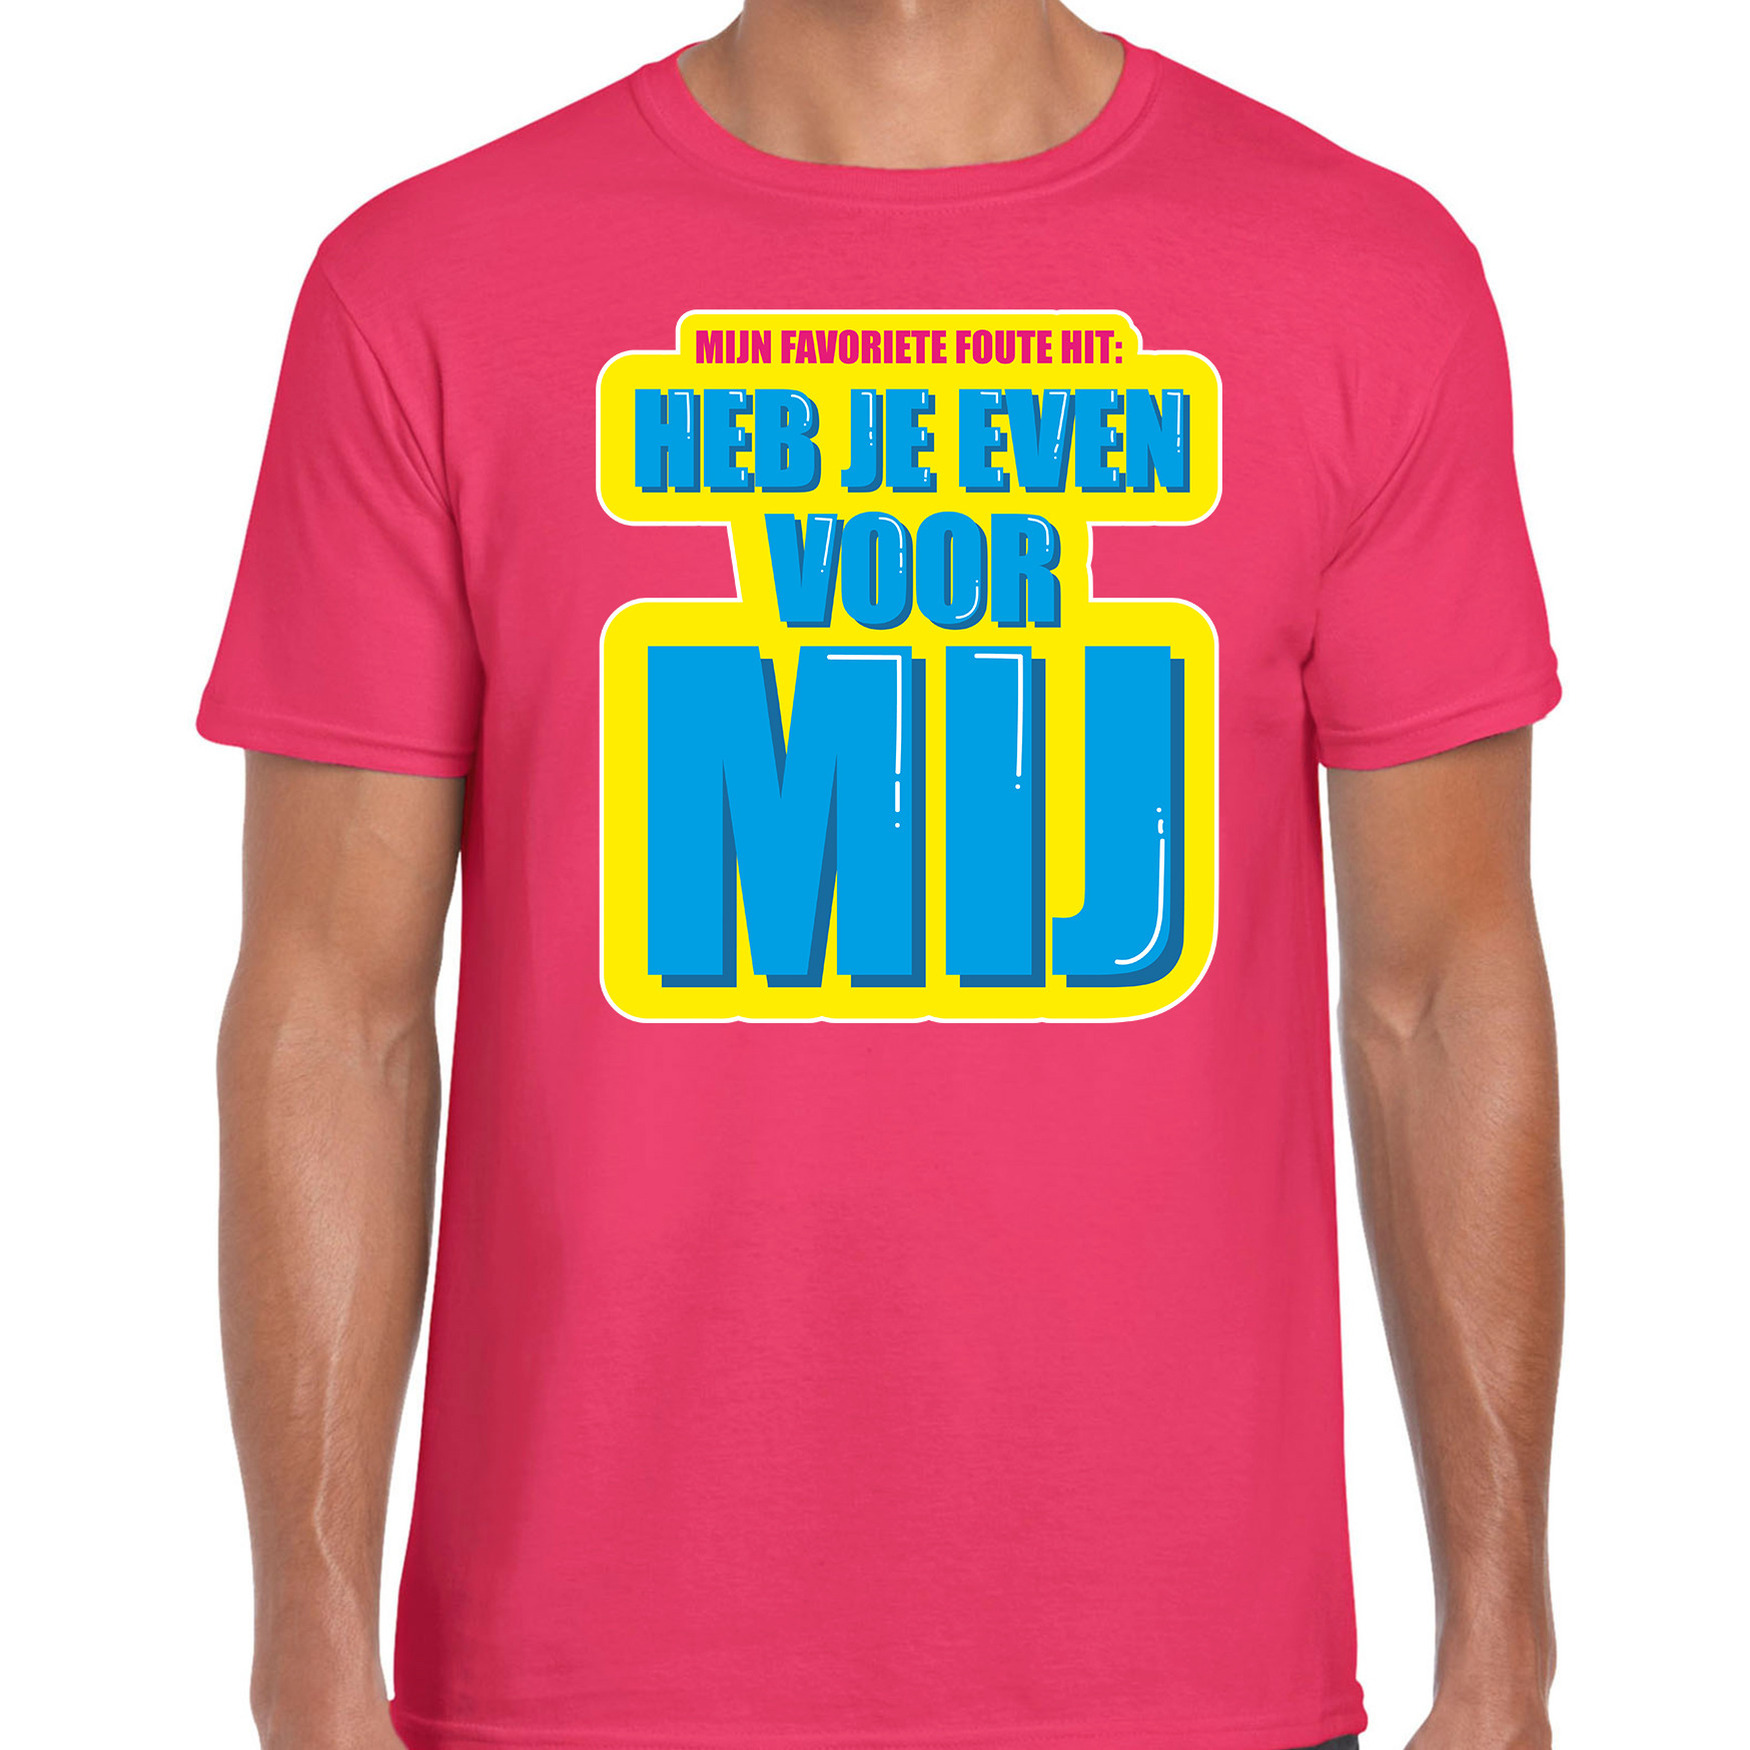 Foute party Heb je even voor mij verkleed t-shirt roze heren Foute party hits outfit- kleding